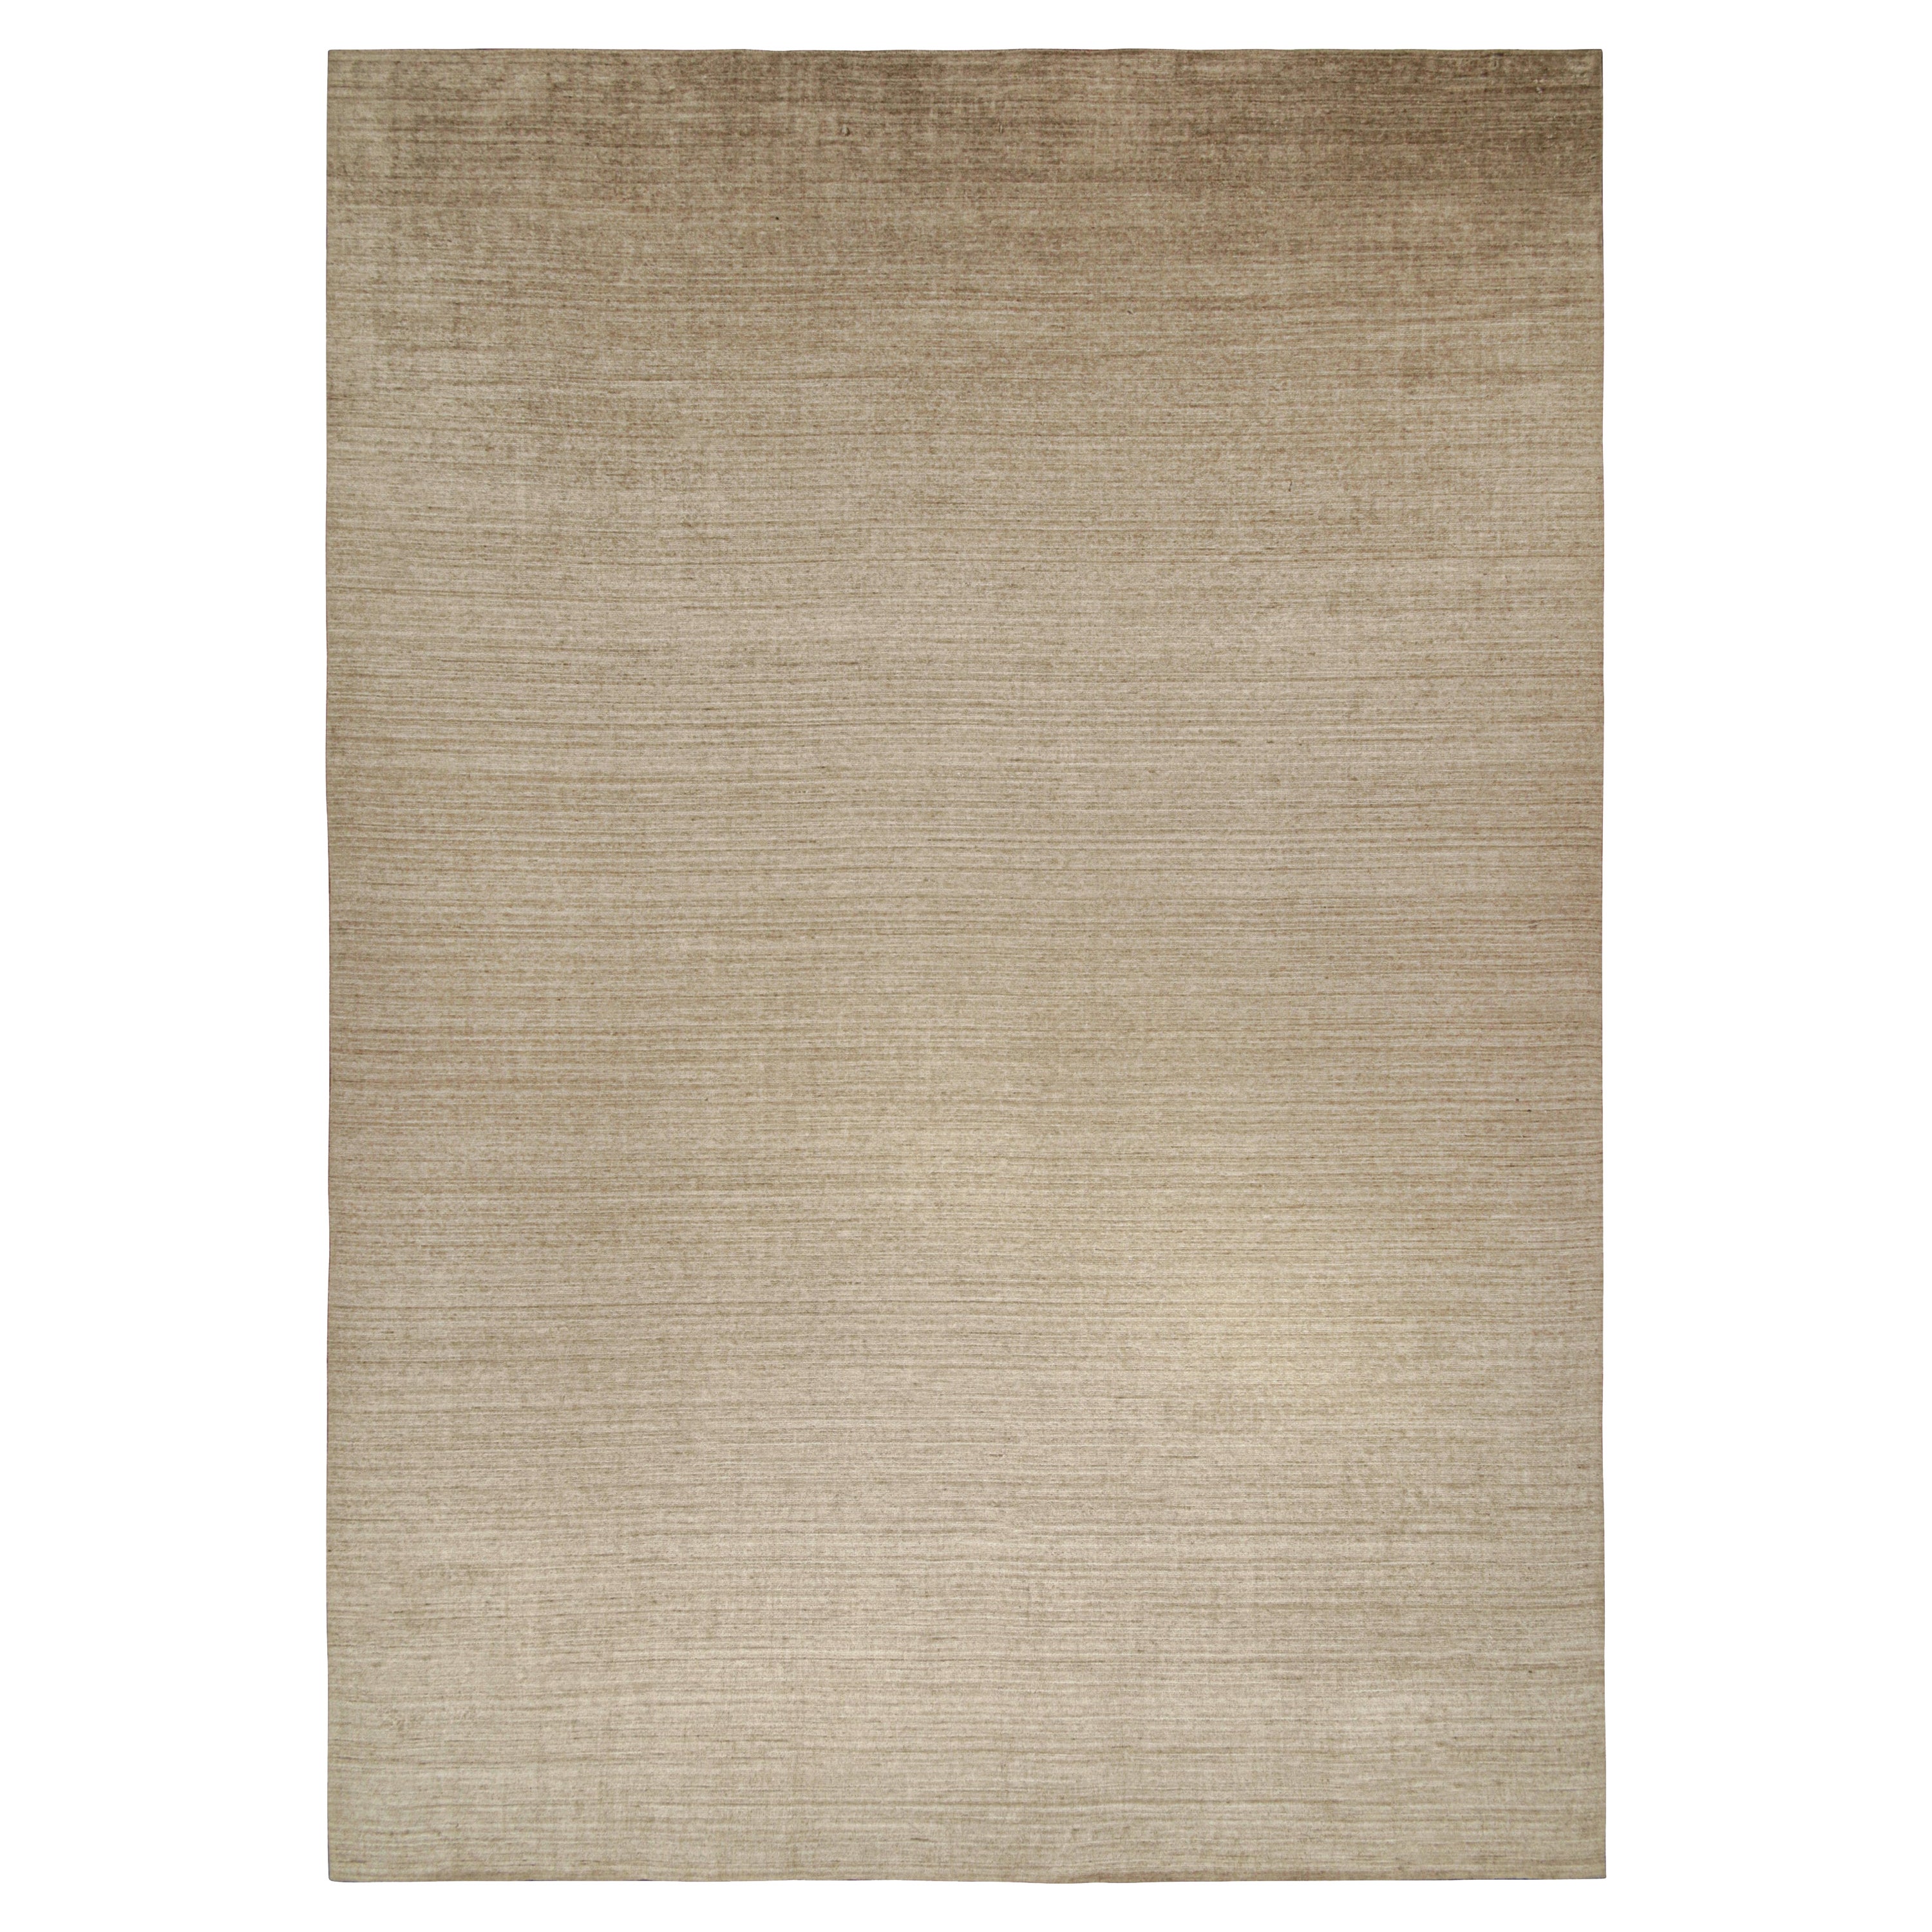 This palace-sized 14x20 rug is a grand new entry to Rug & Kilim’s Texture of Color Collection. 

Connoisseurs will note this piece is from our new Light on Loom line, which includes quicker custom capabilities than ever before. This piece and